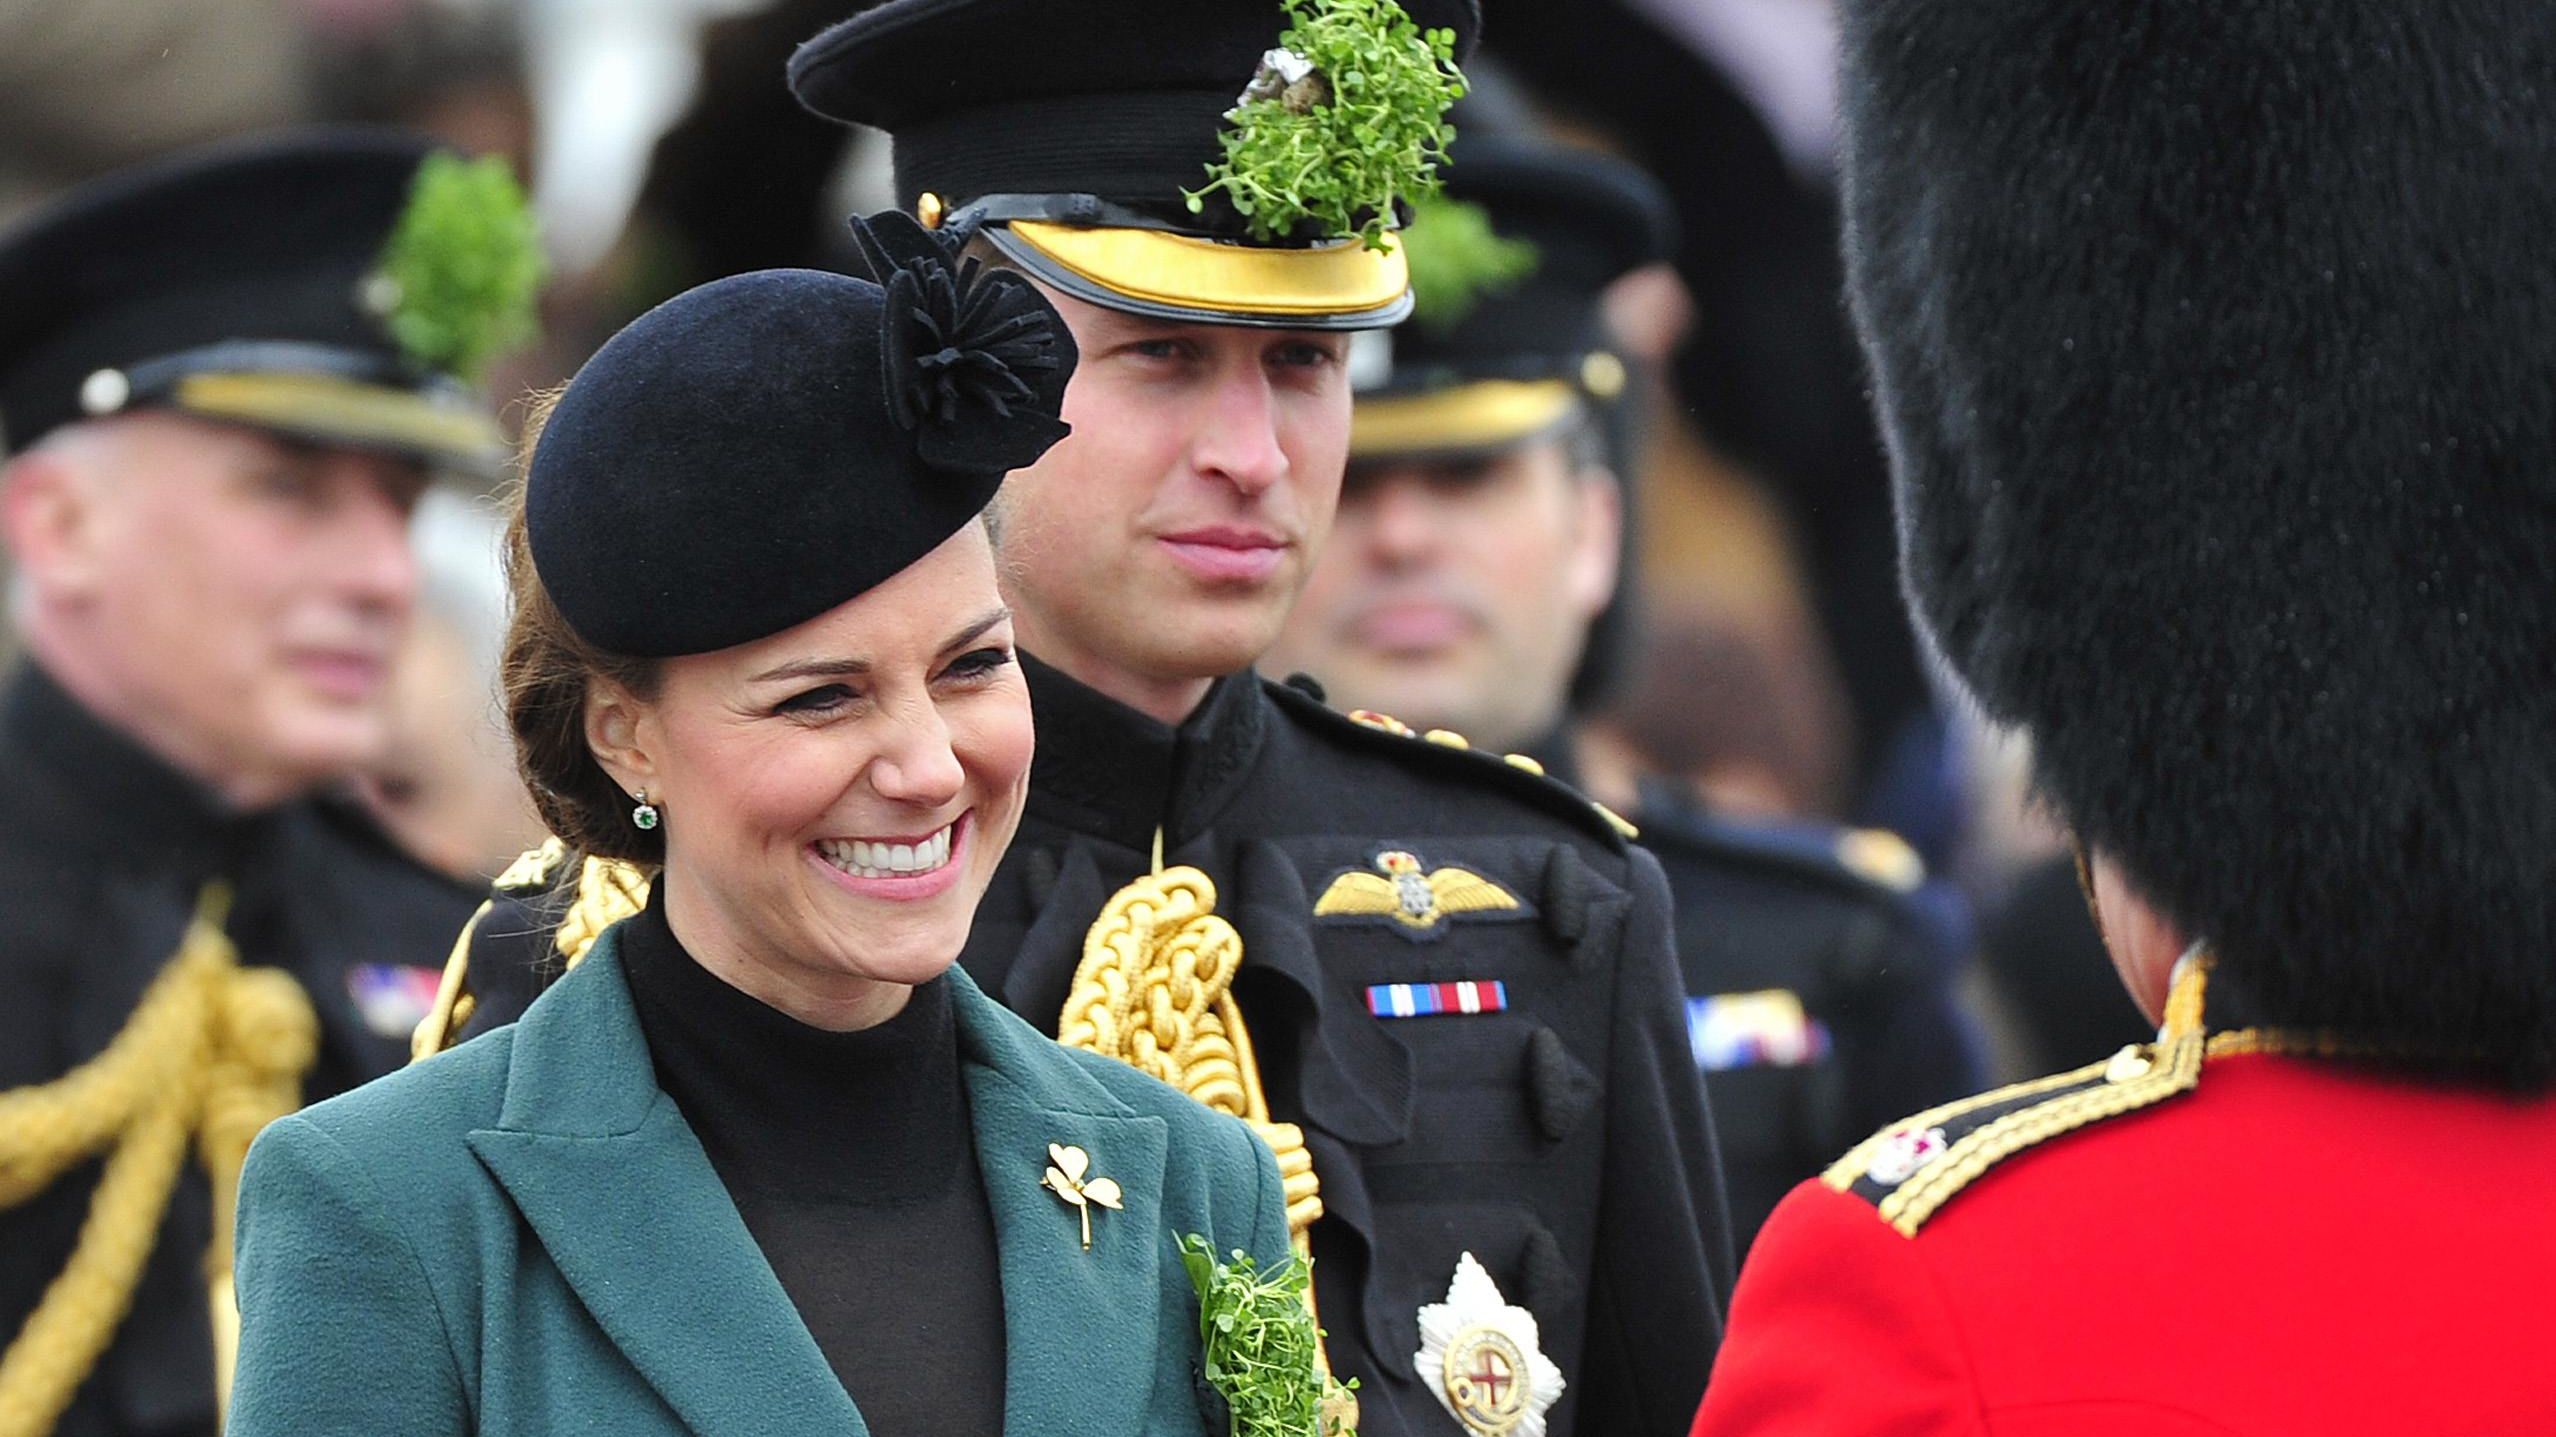 William and Catherine attend a St. Patrick's Day parade as they visit Aldershot, England, in March 2013.